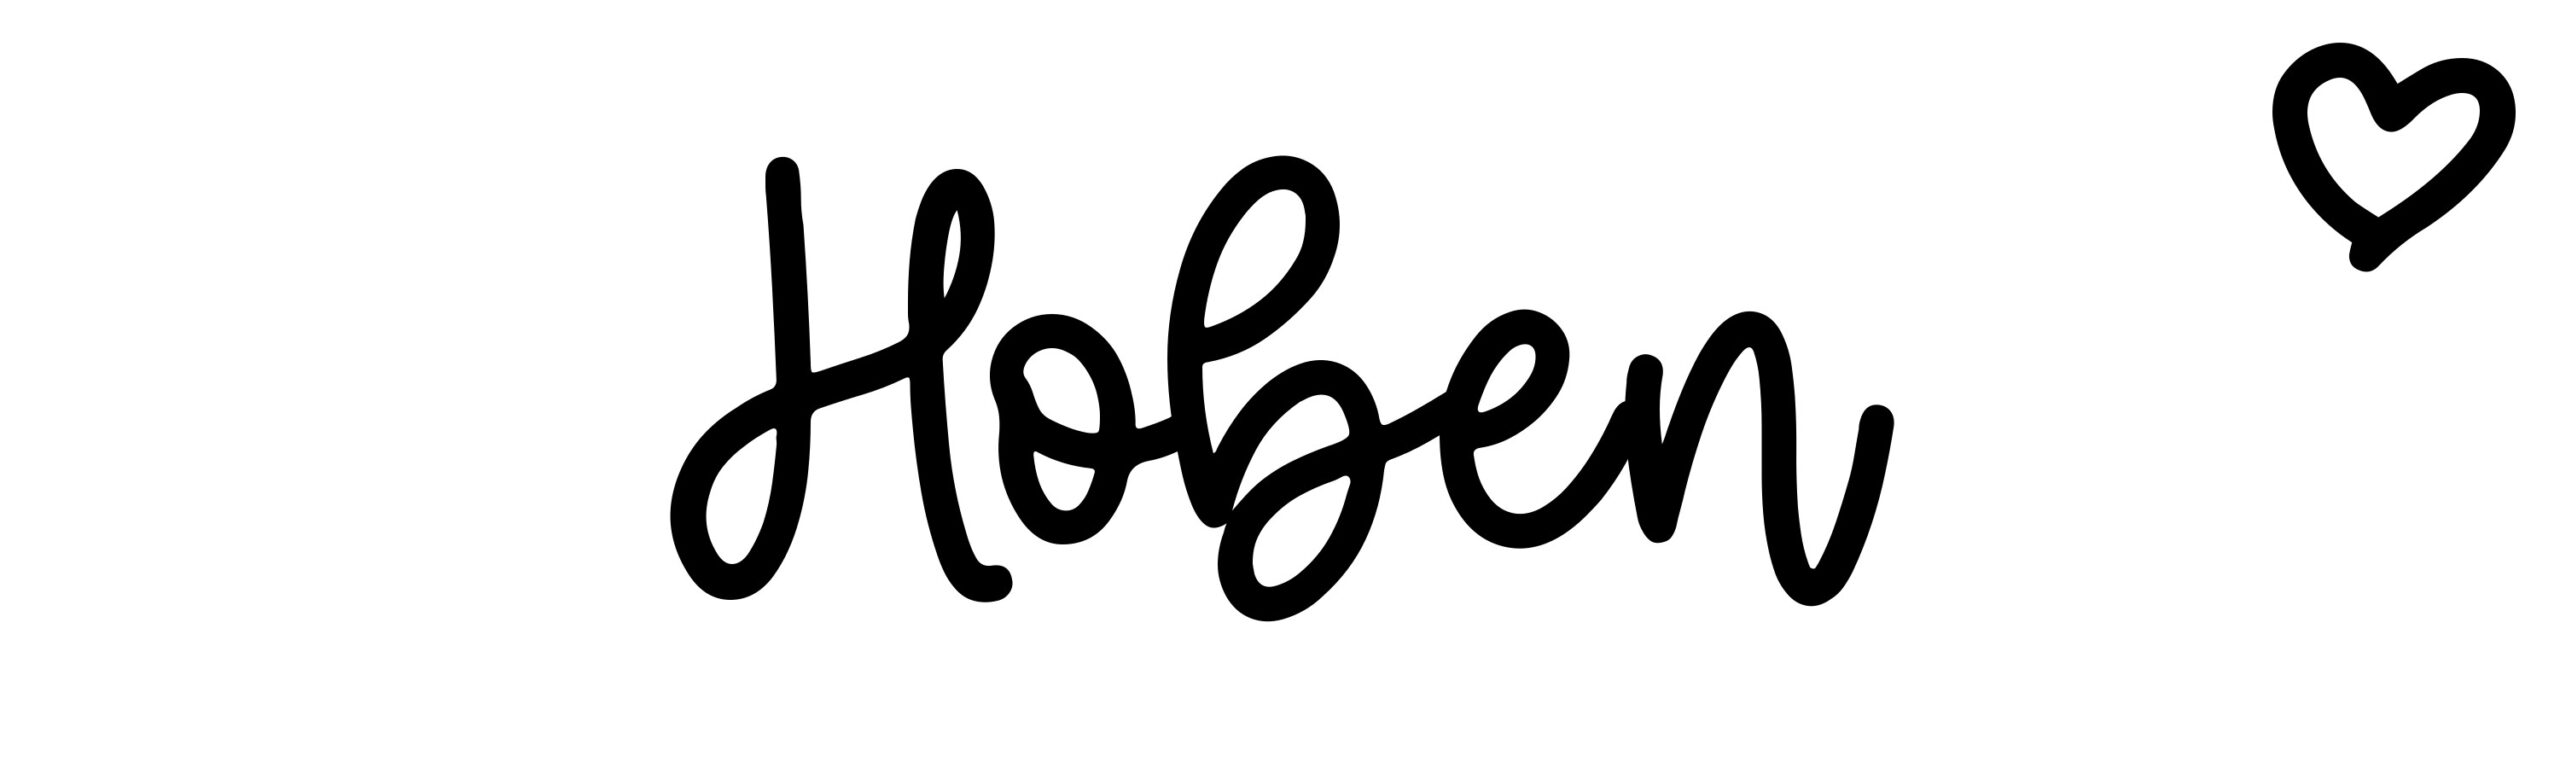 Hoben - Name meaning, origin, variations and more